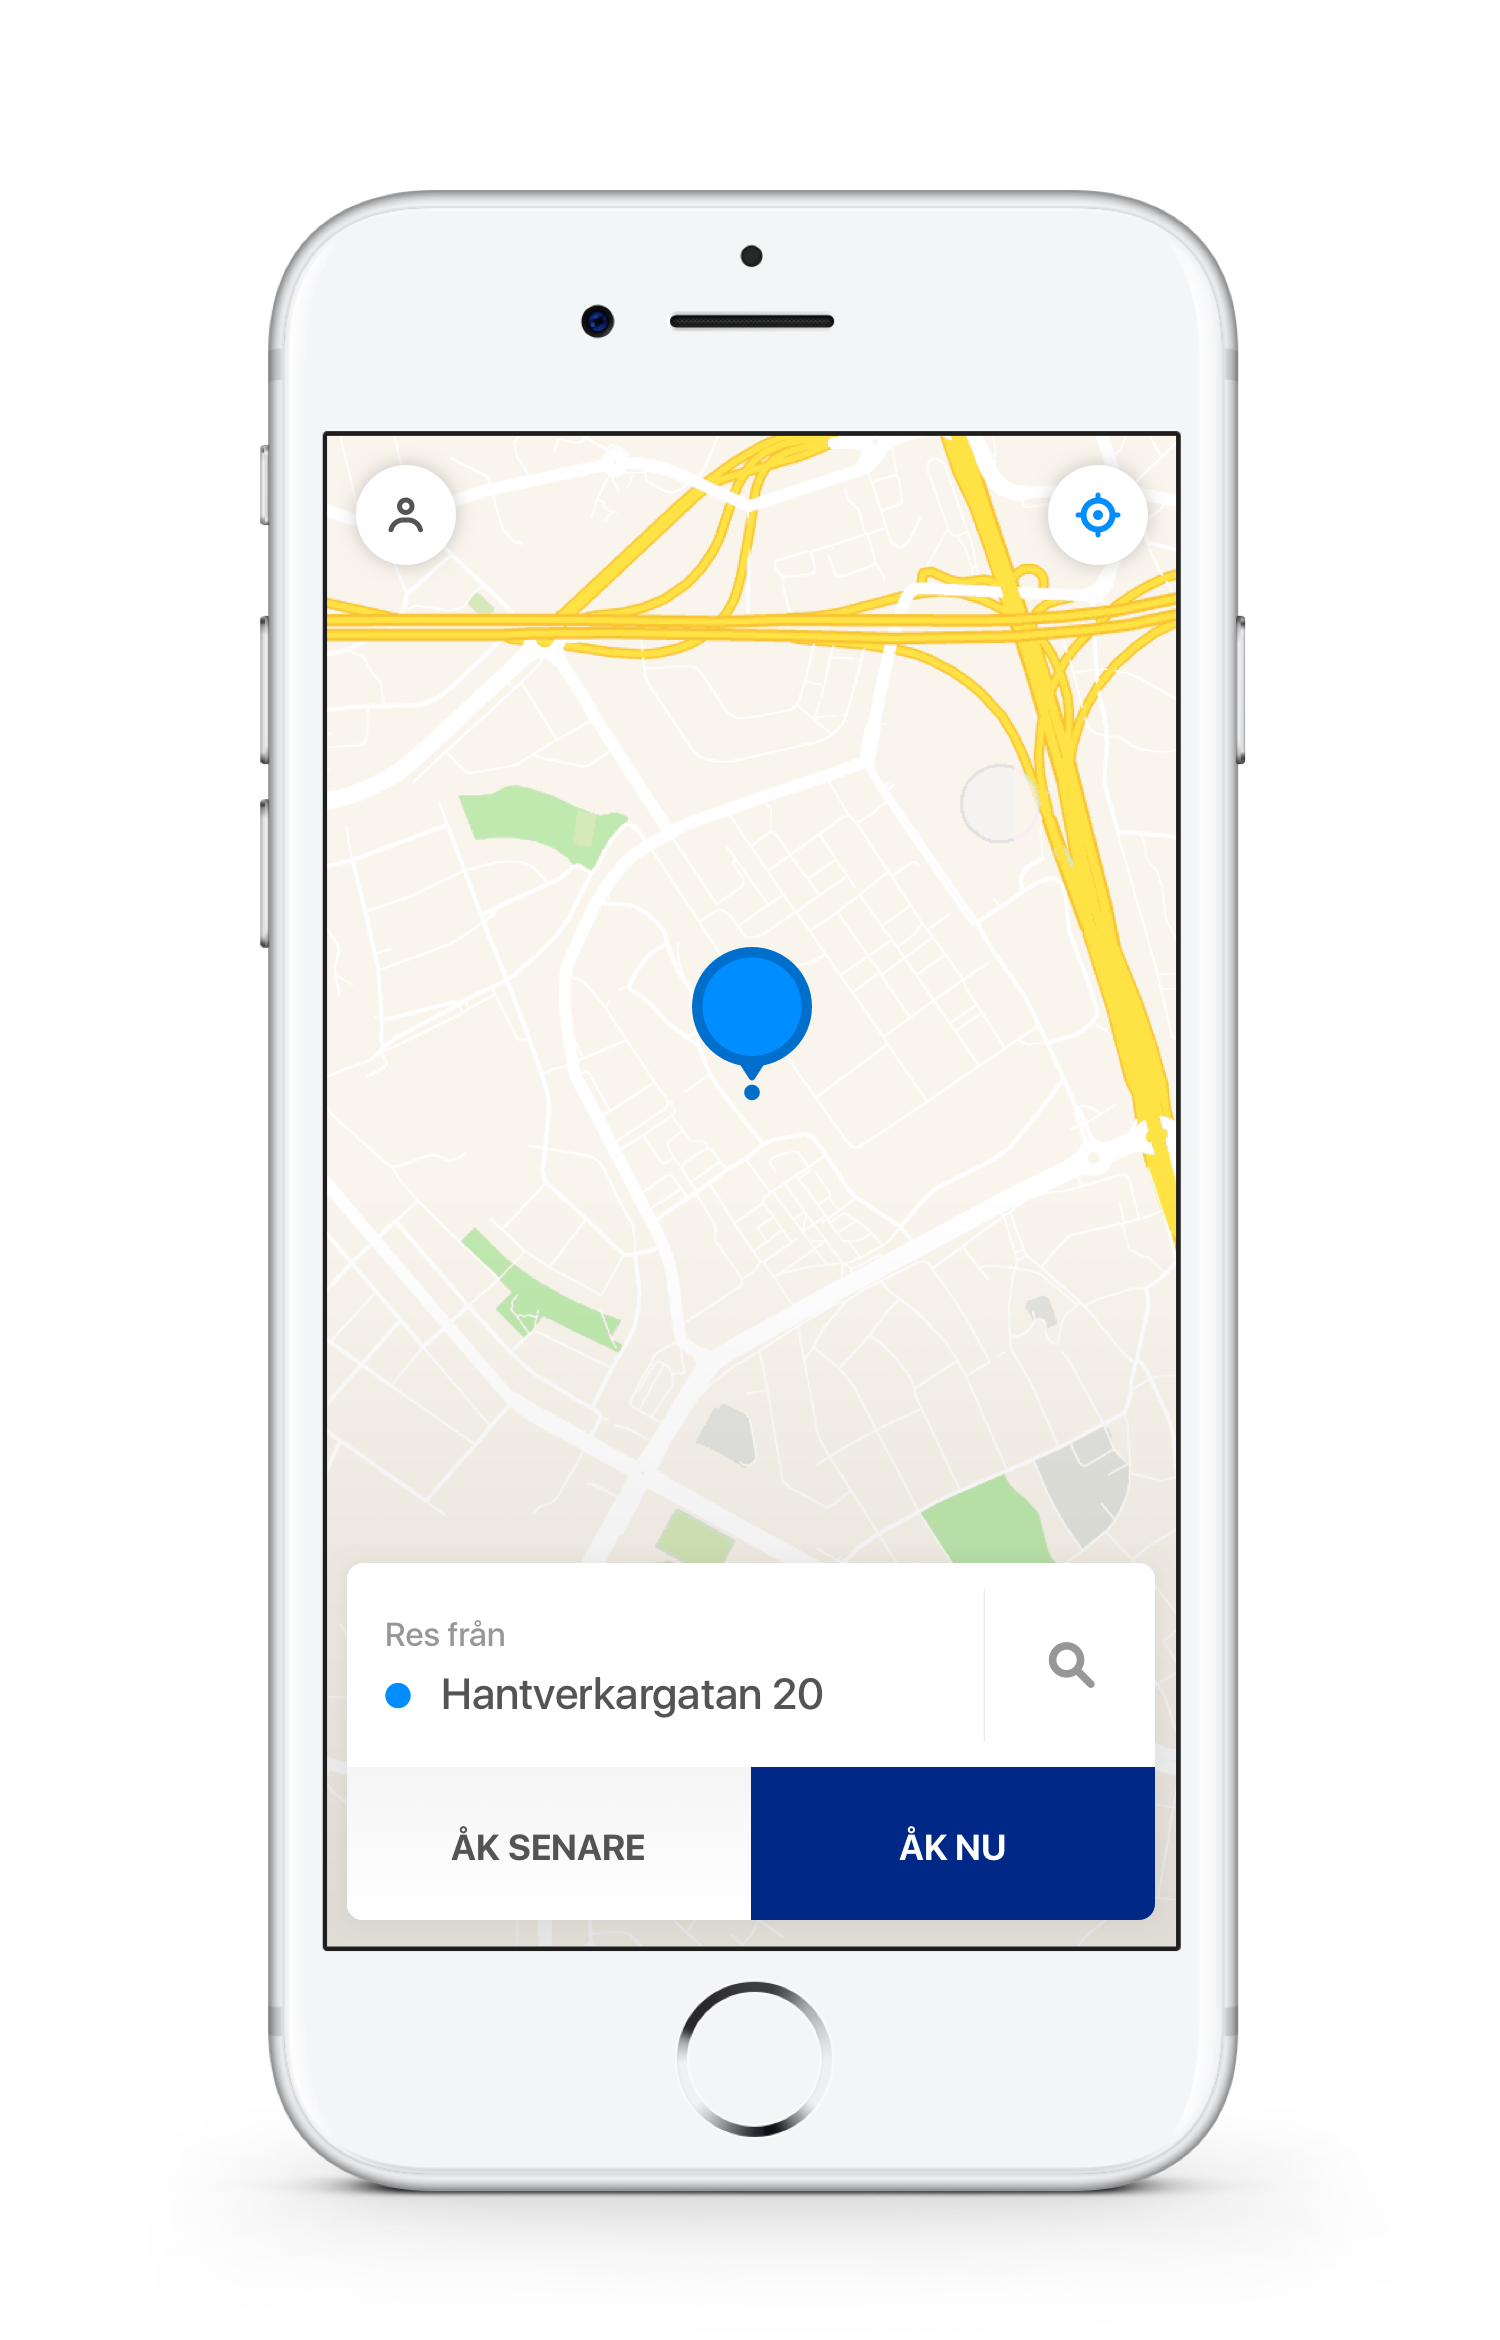 Ordering taxi with app